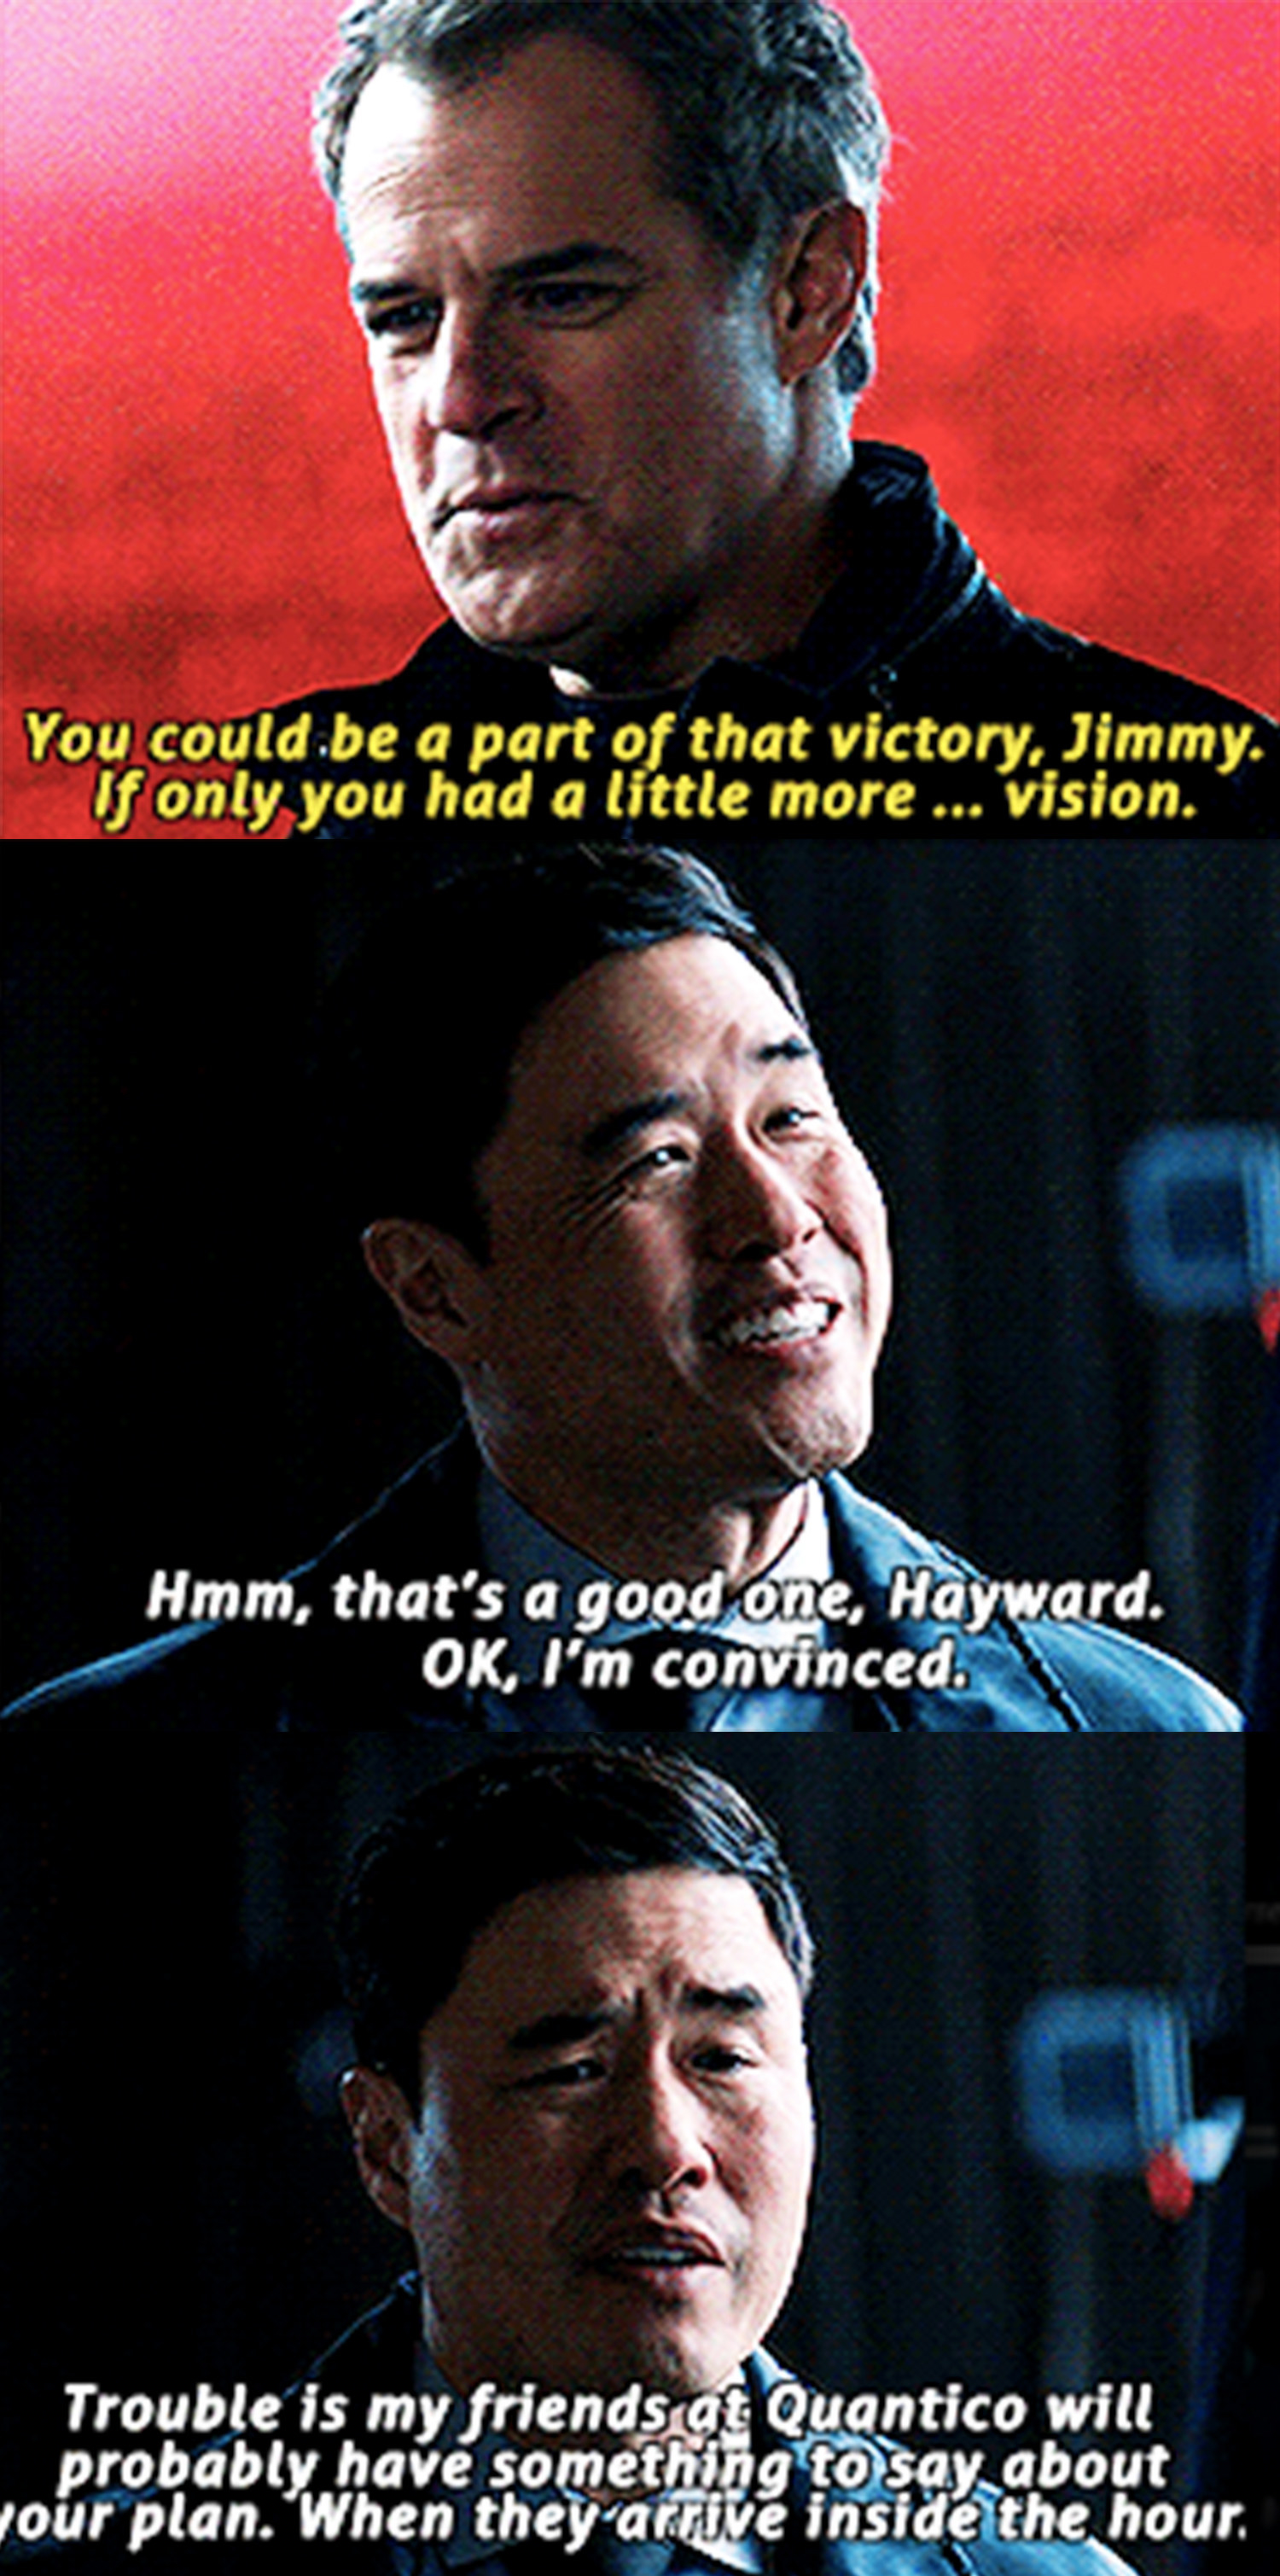 Jimmy tells Hayward that his friends at Quantico will have an issue with his plan